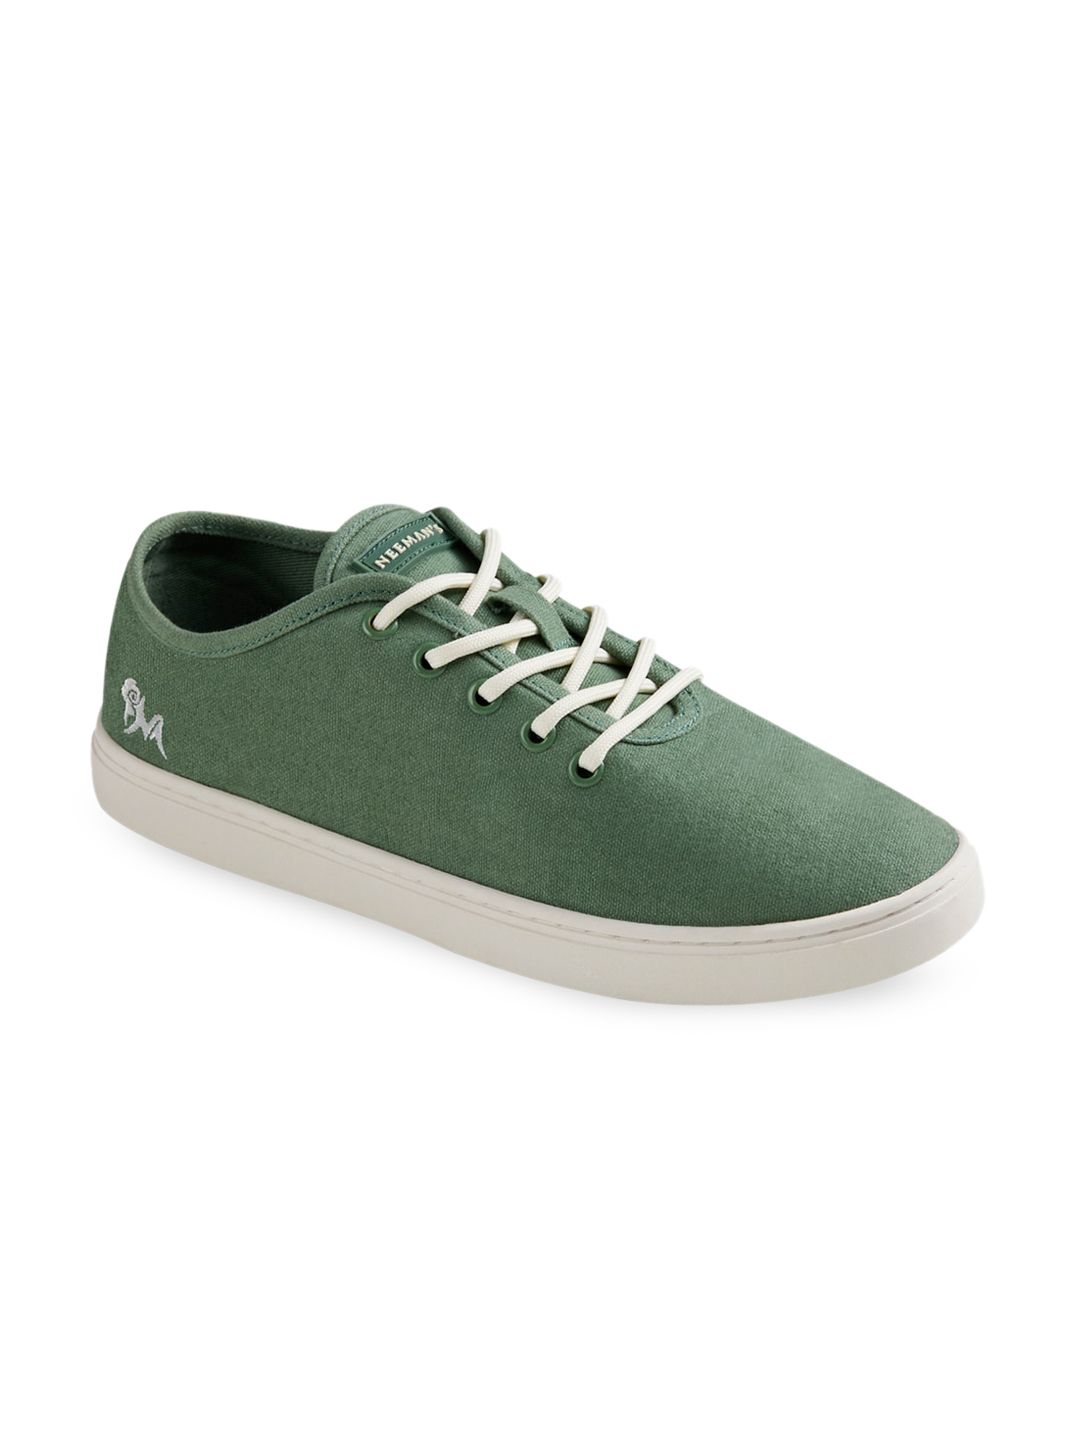 NEEMANS Unisex Green Classic Lace Up Sneakers Price in India